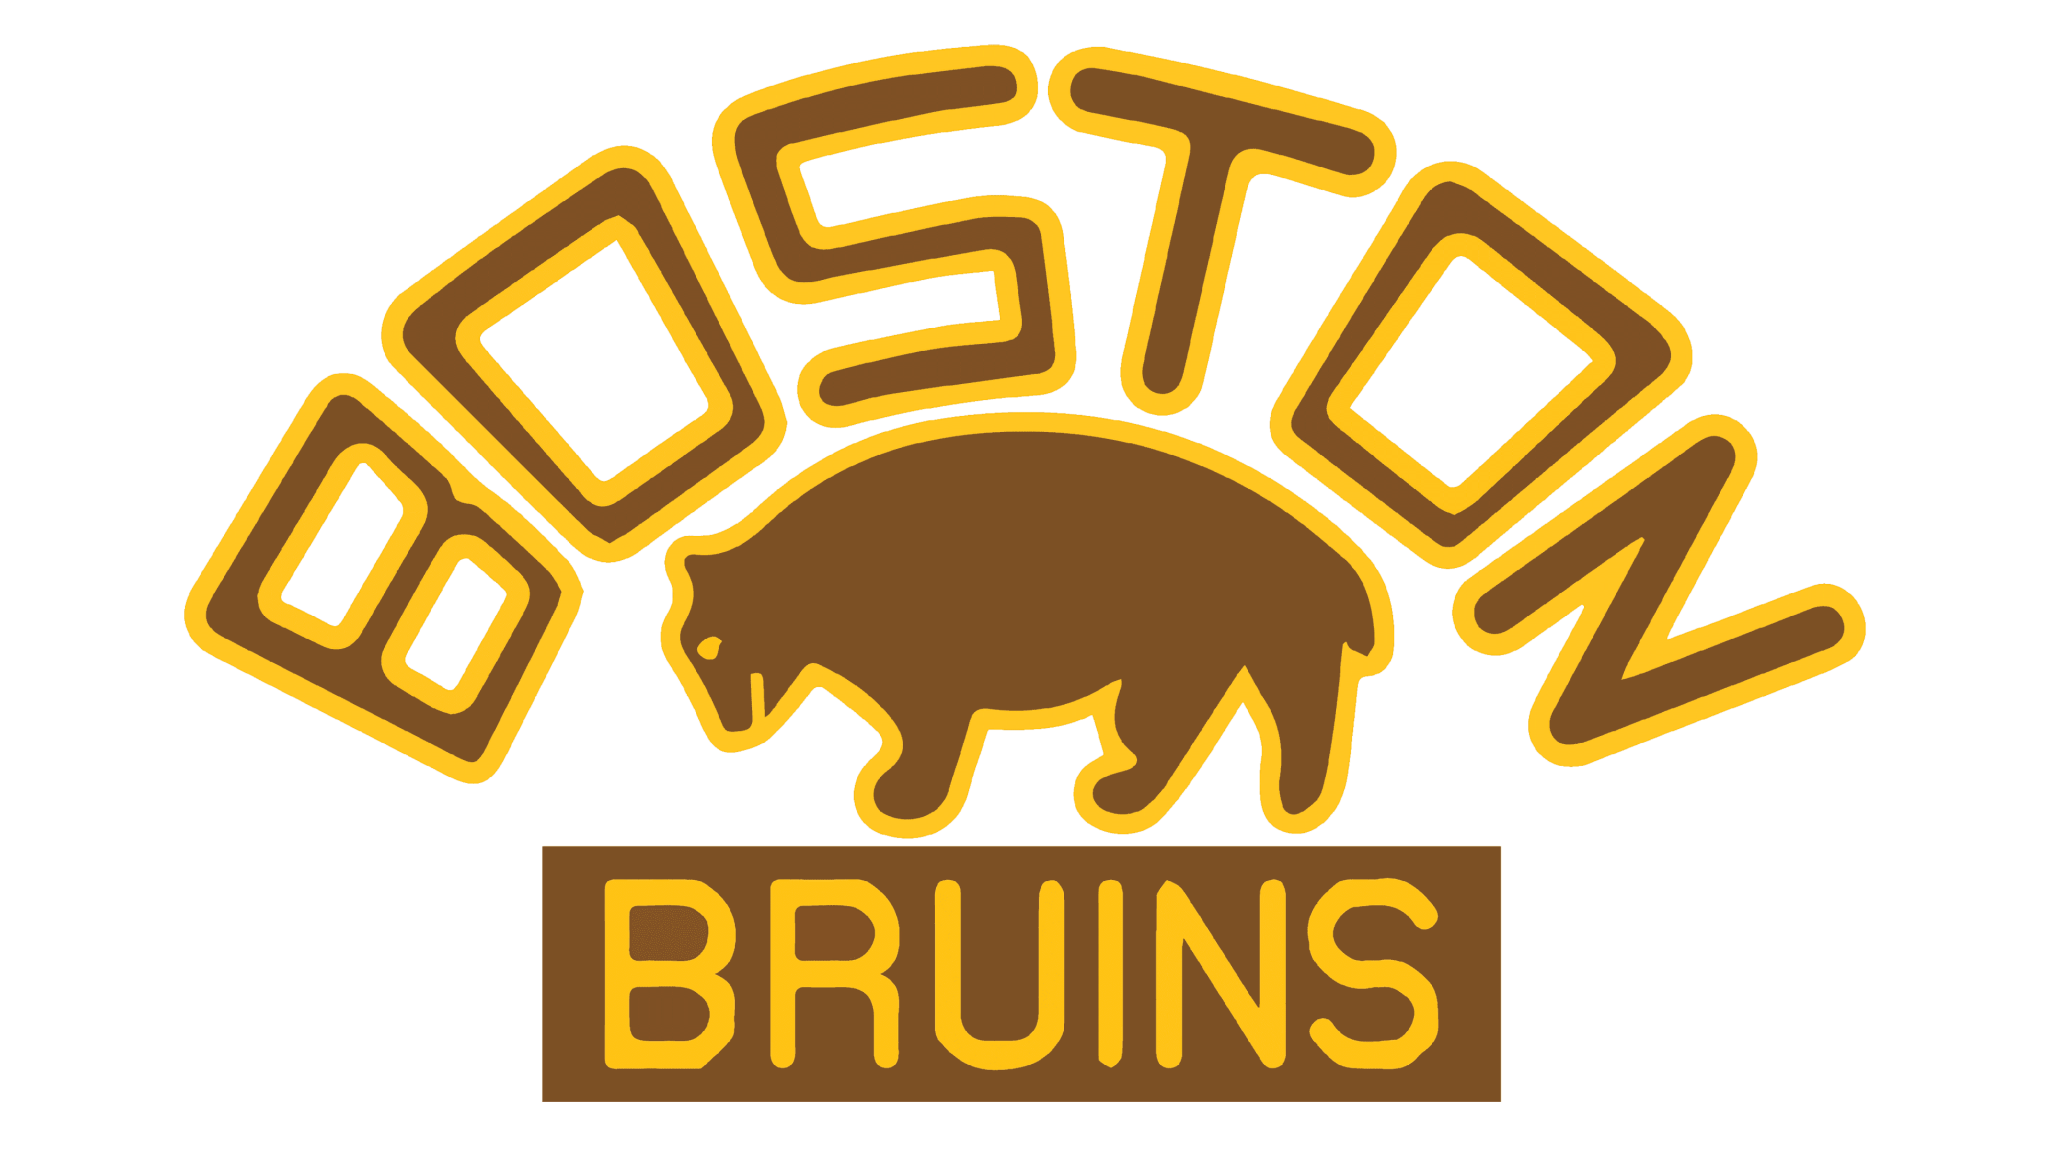 Boston Bruins Logo and symbol, meaning, history, sign.